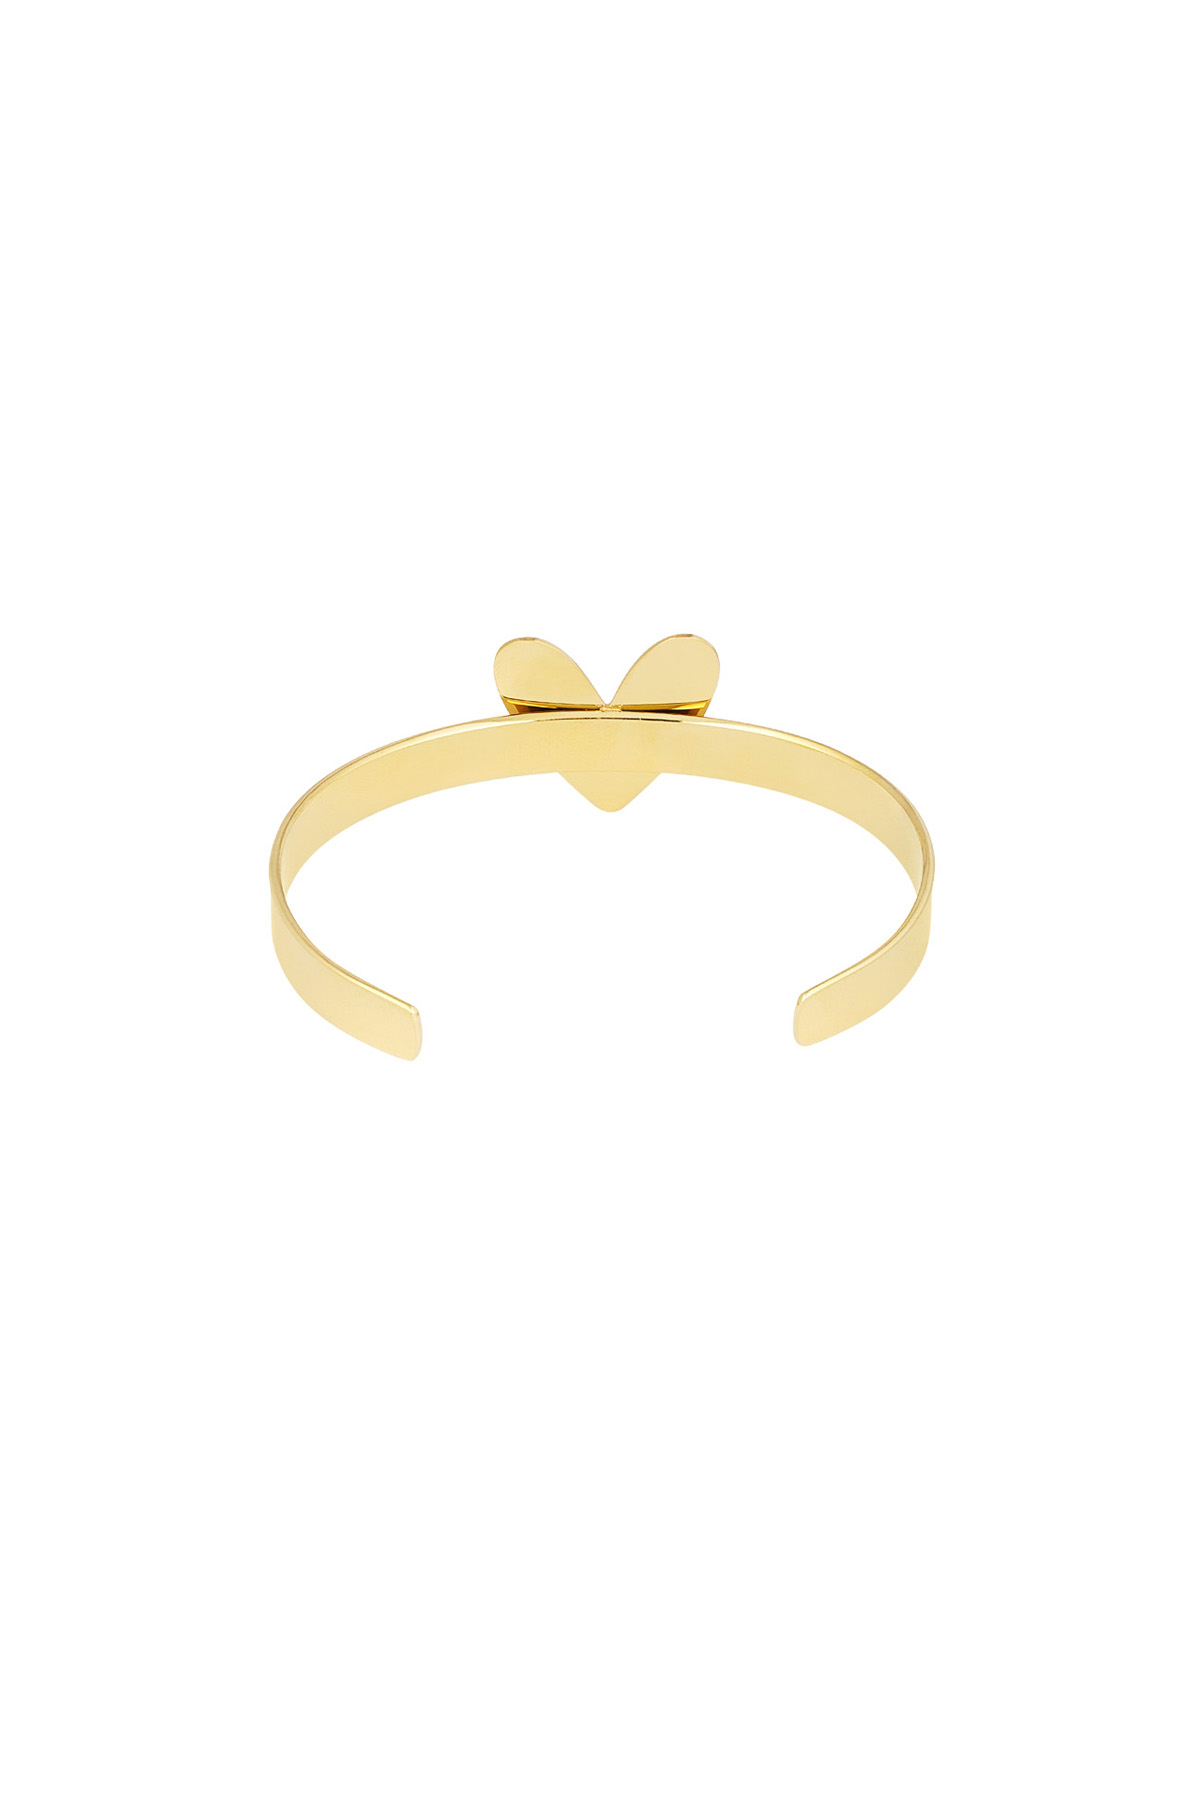 Double love ring - gold Picture4